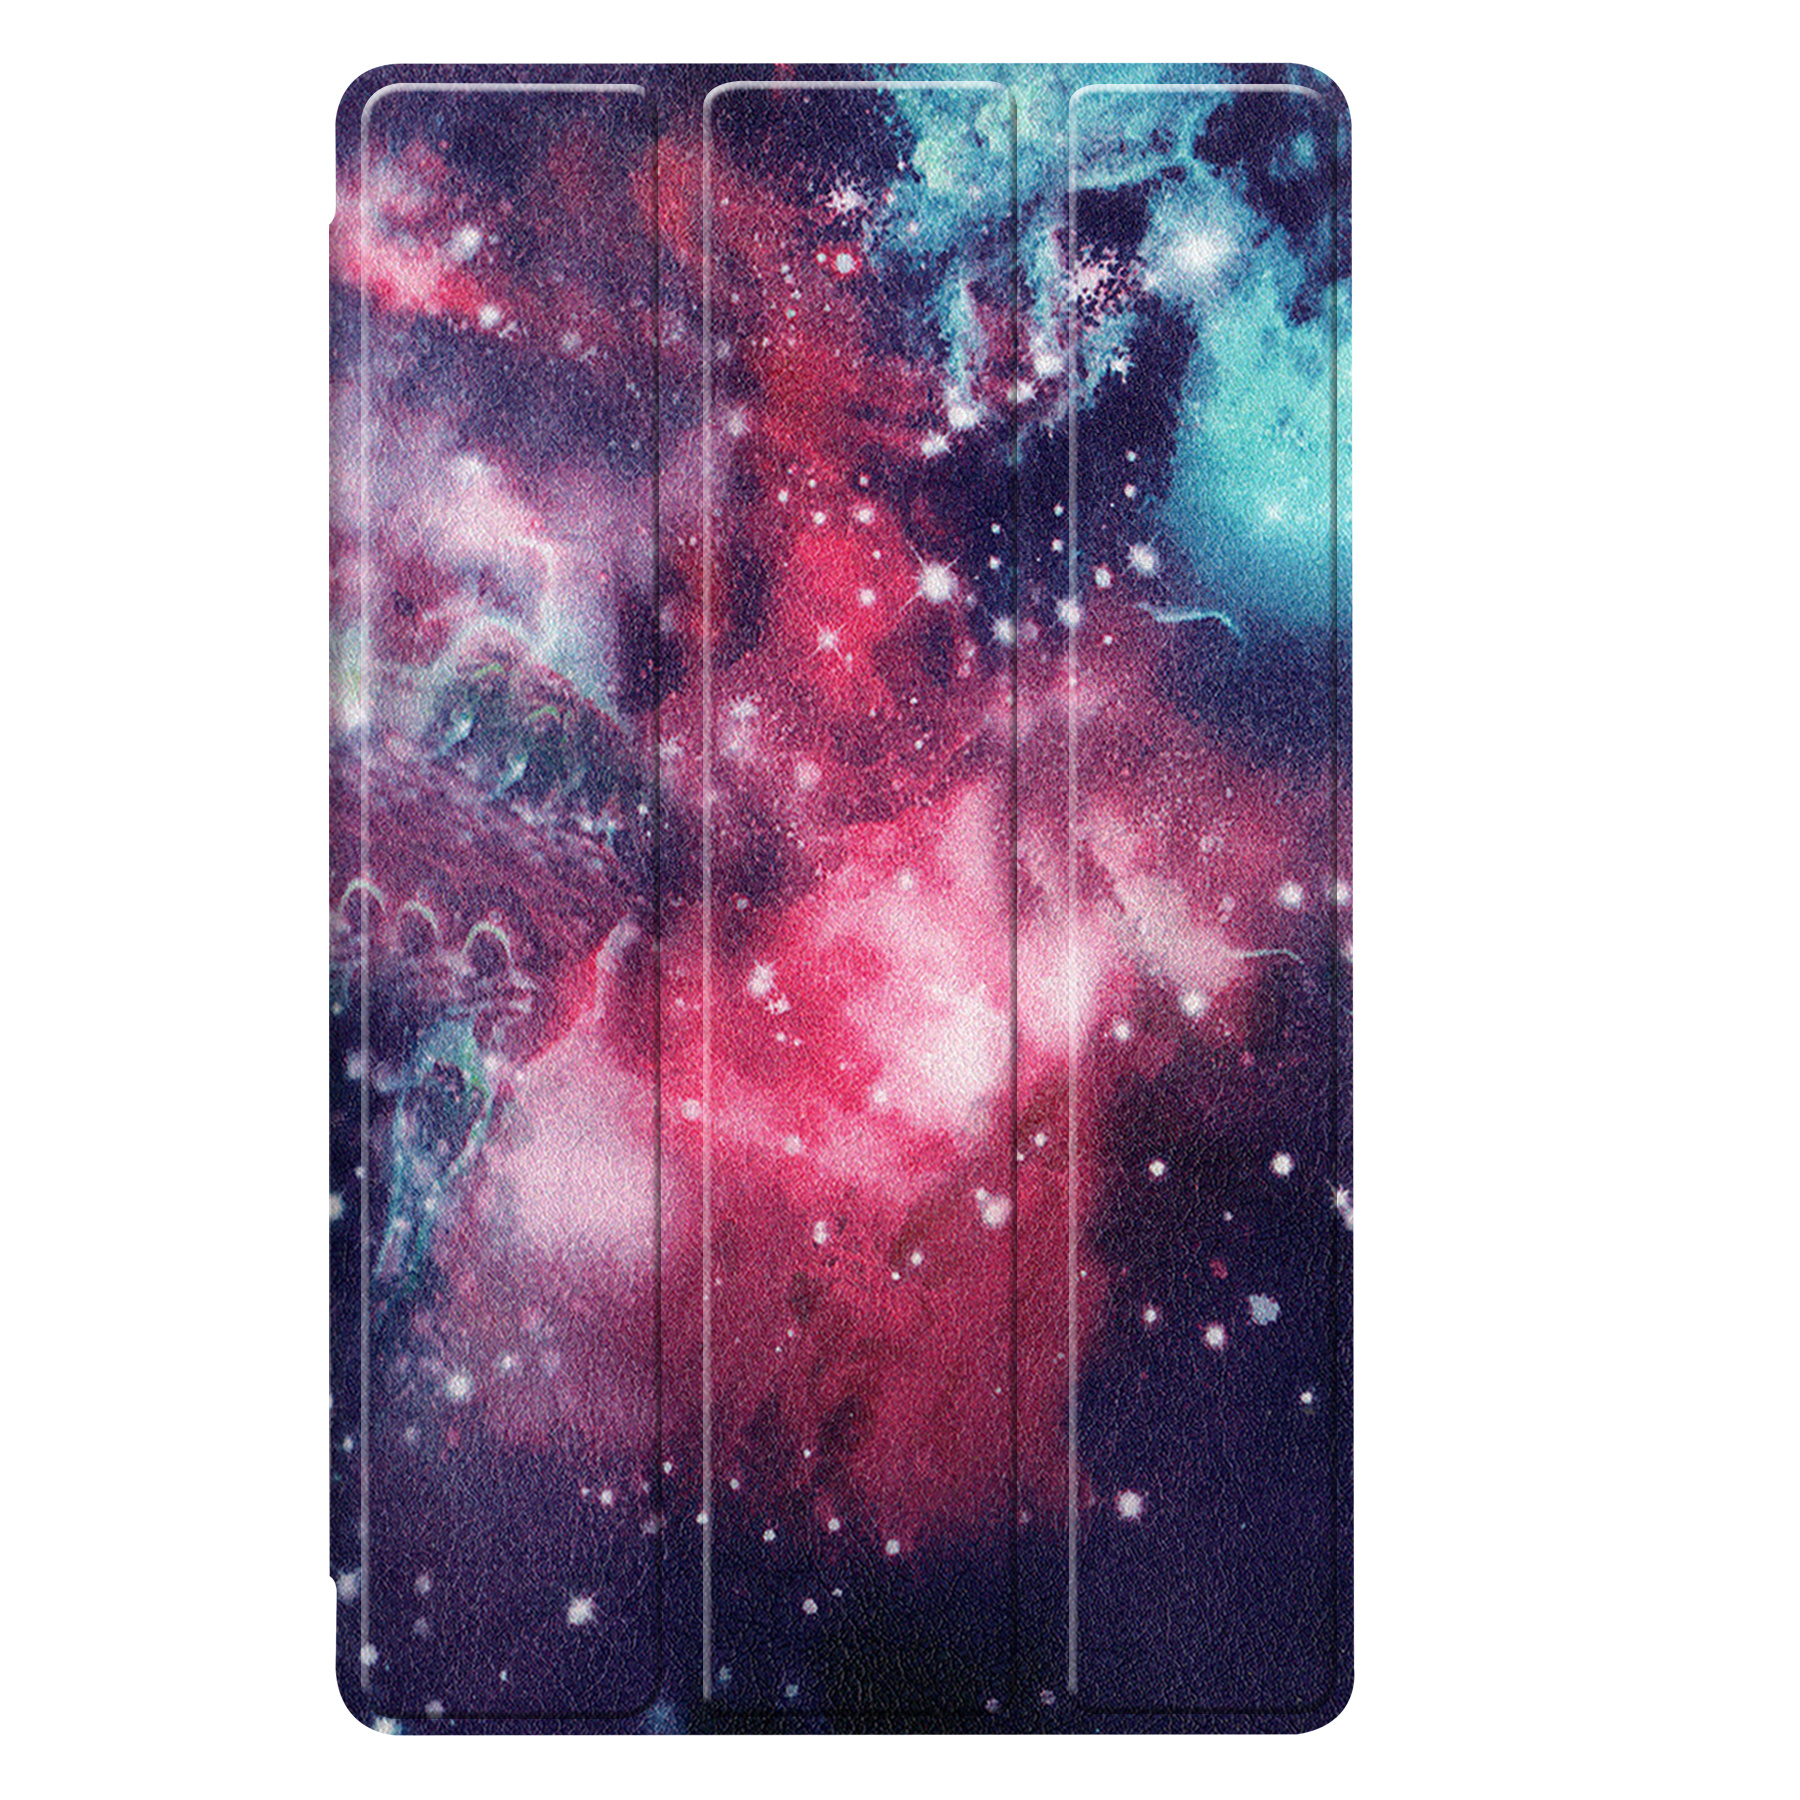 Nomfy Samsung Tab S6 Lite Hoesje Book Case Hoes - Samsung Galaxy Tab S6 Lite Hoes Hardcover Hoesje - Galaxy